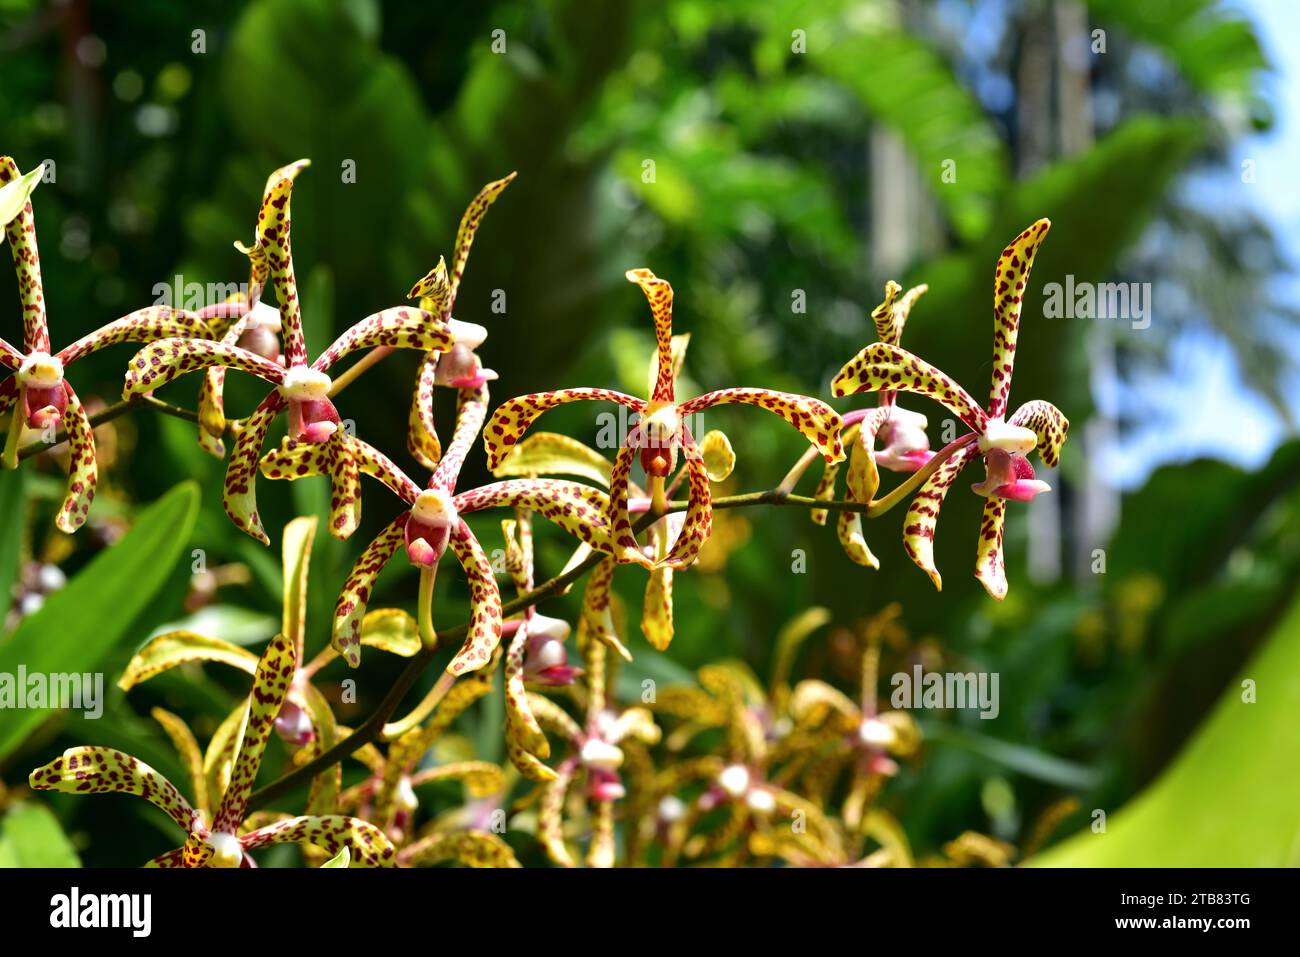 Spider orchid (Arachnis flos-aeris) is an epiphytic orchid native of the mangroves of Indonesia, Malaysia and Philippines. Stock Photo